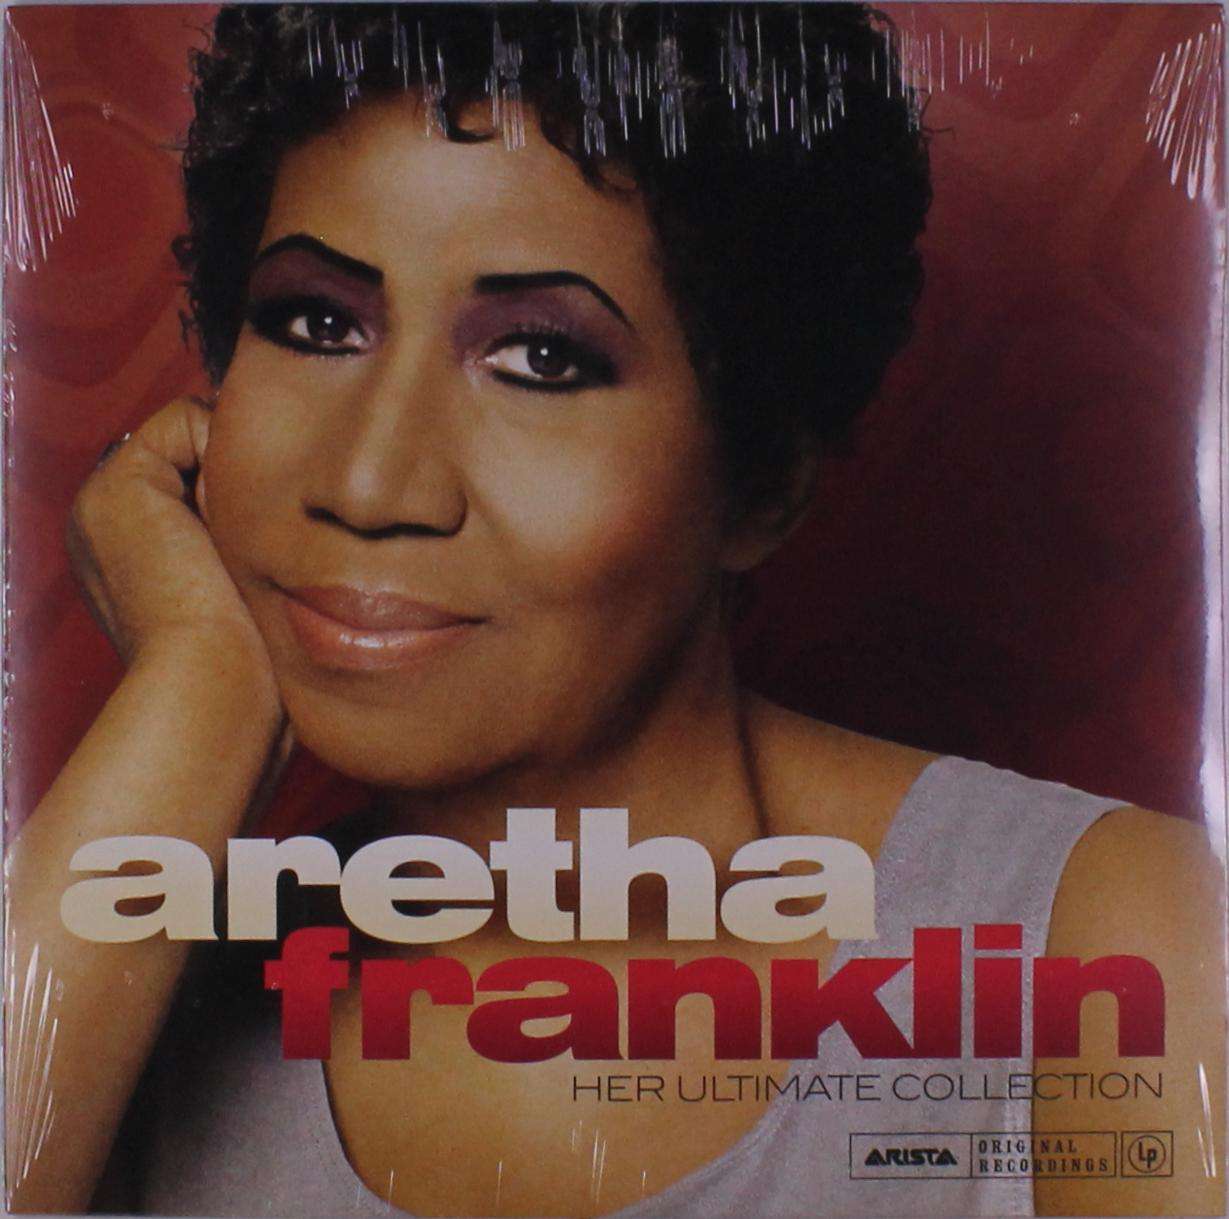 Aretha Franklin - Her Ultimate Collection - 33RPM